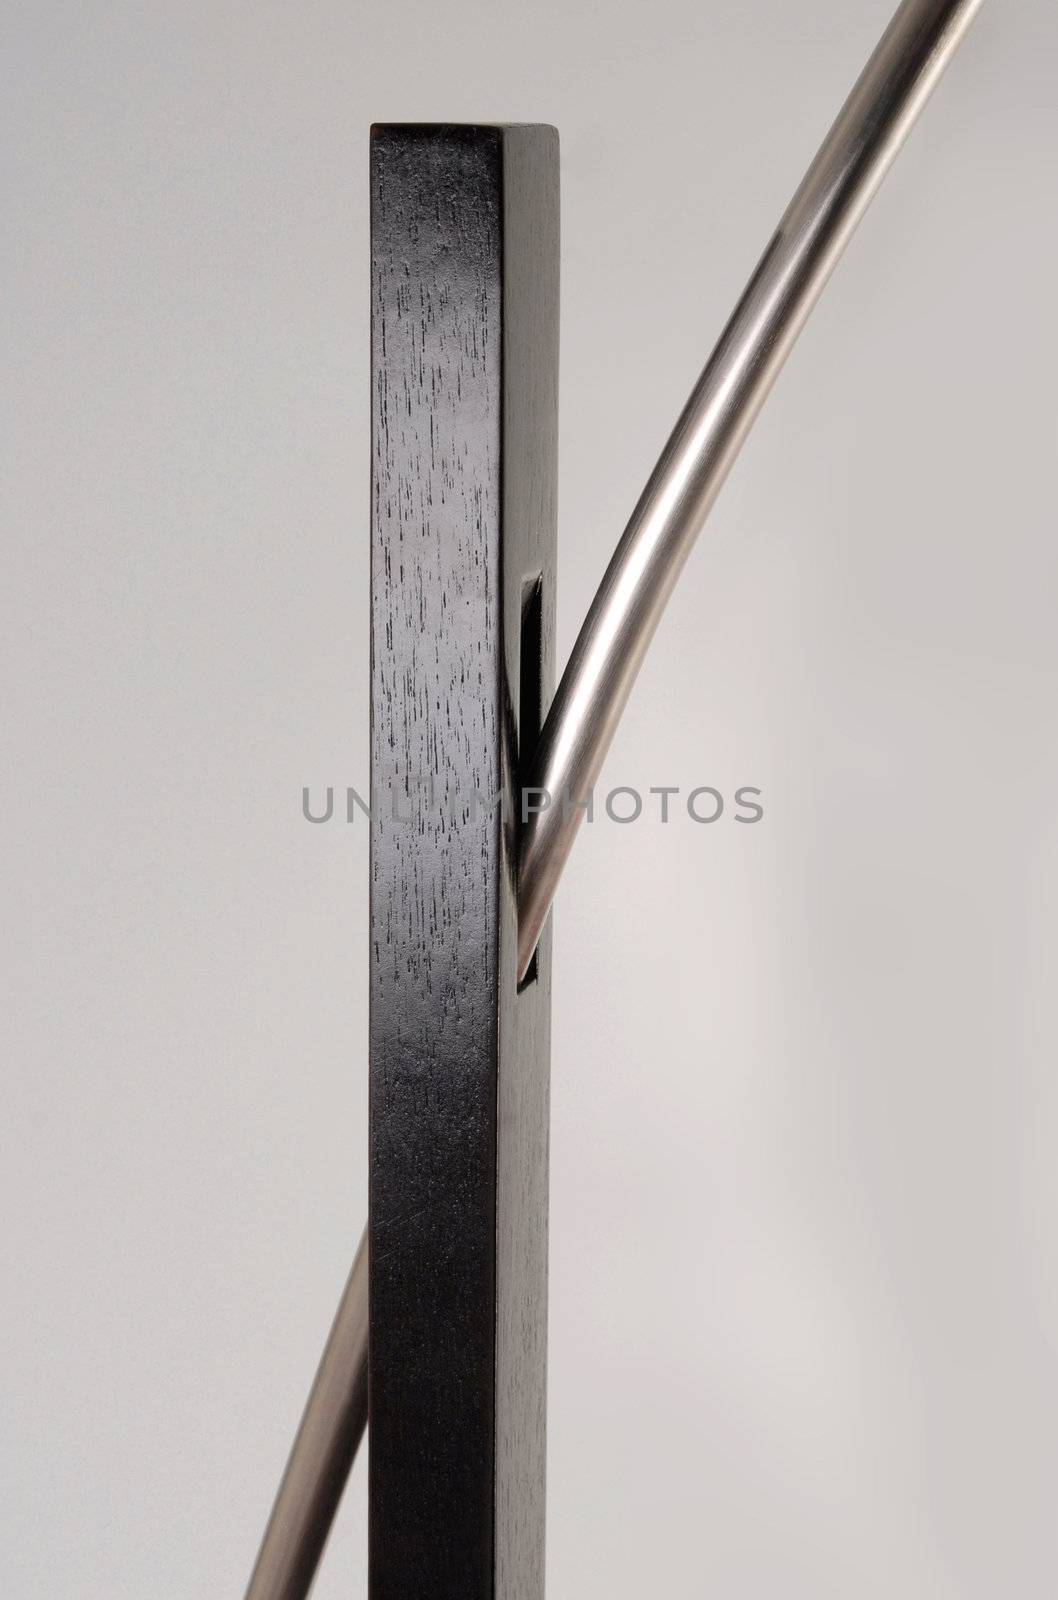 Metallic and wooden contemporary floor lamp detail.  Isolated object